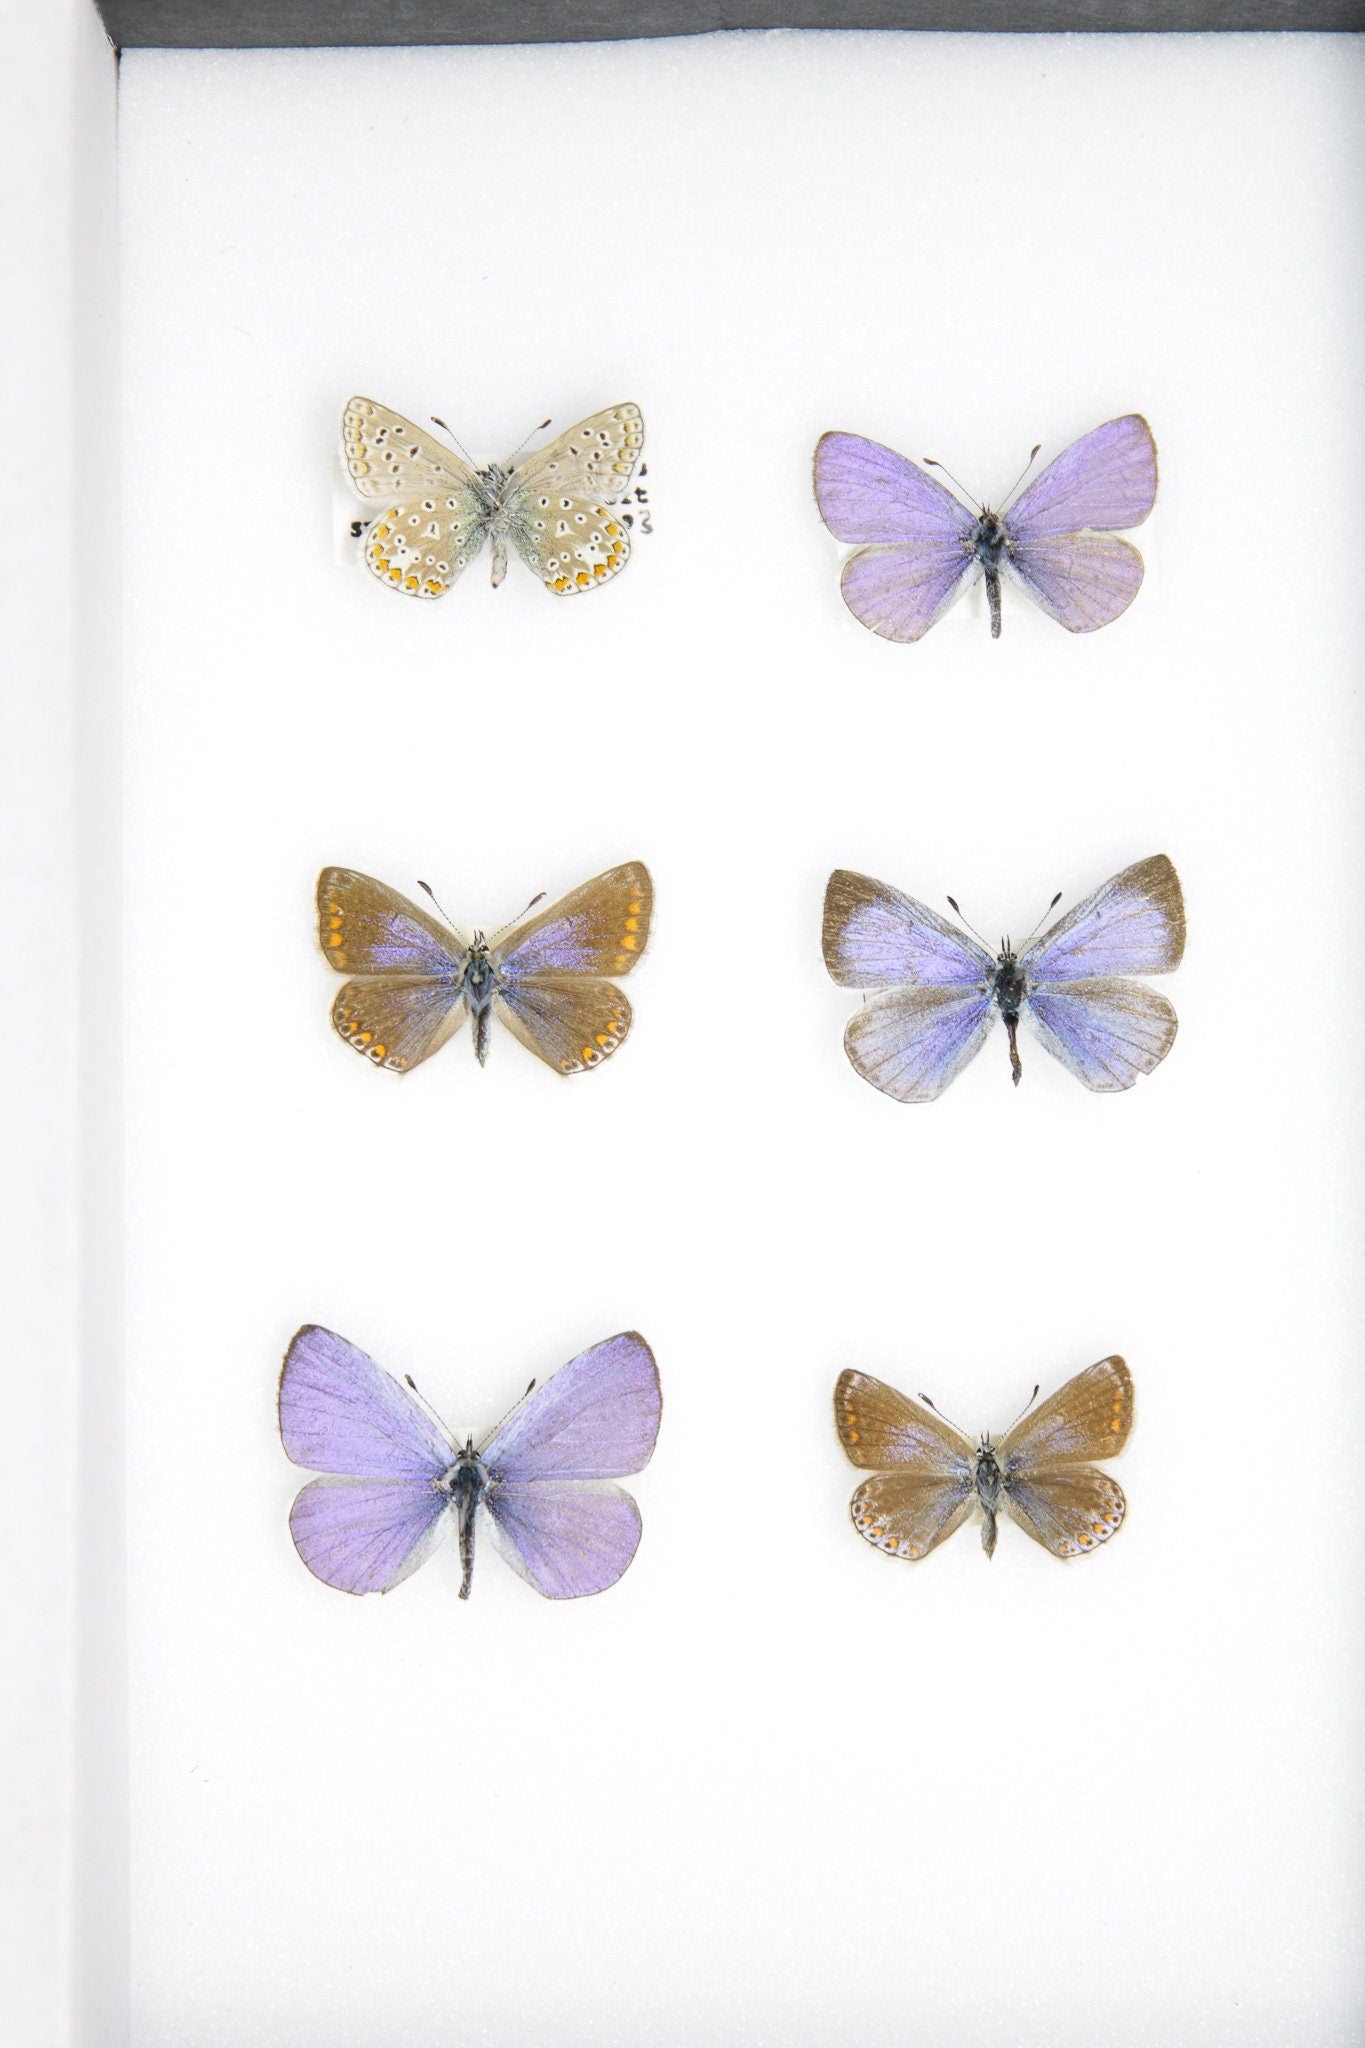 A Collection of Palearctic Blue Butterflies with Scientific Collection Data, A1 Quality, Entomology, Real Lepidoptera Specimens #SE06